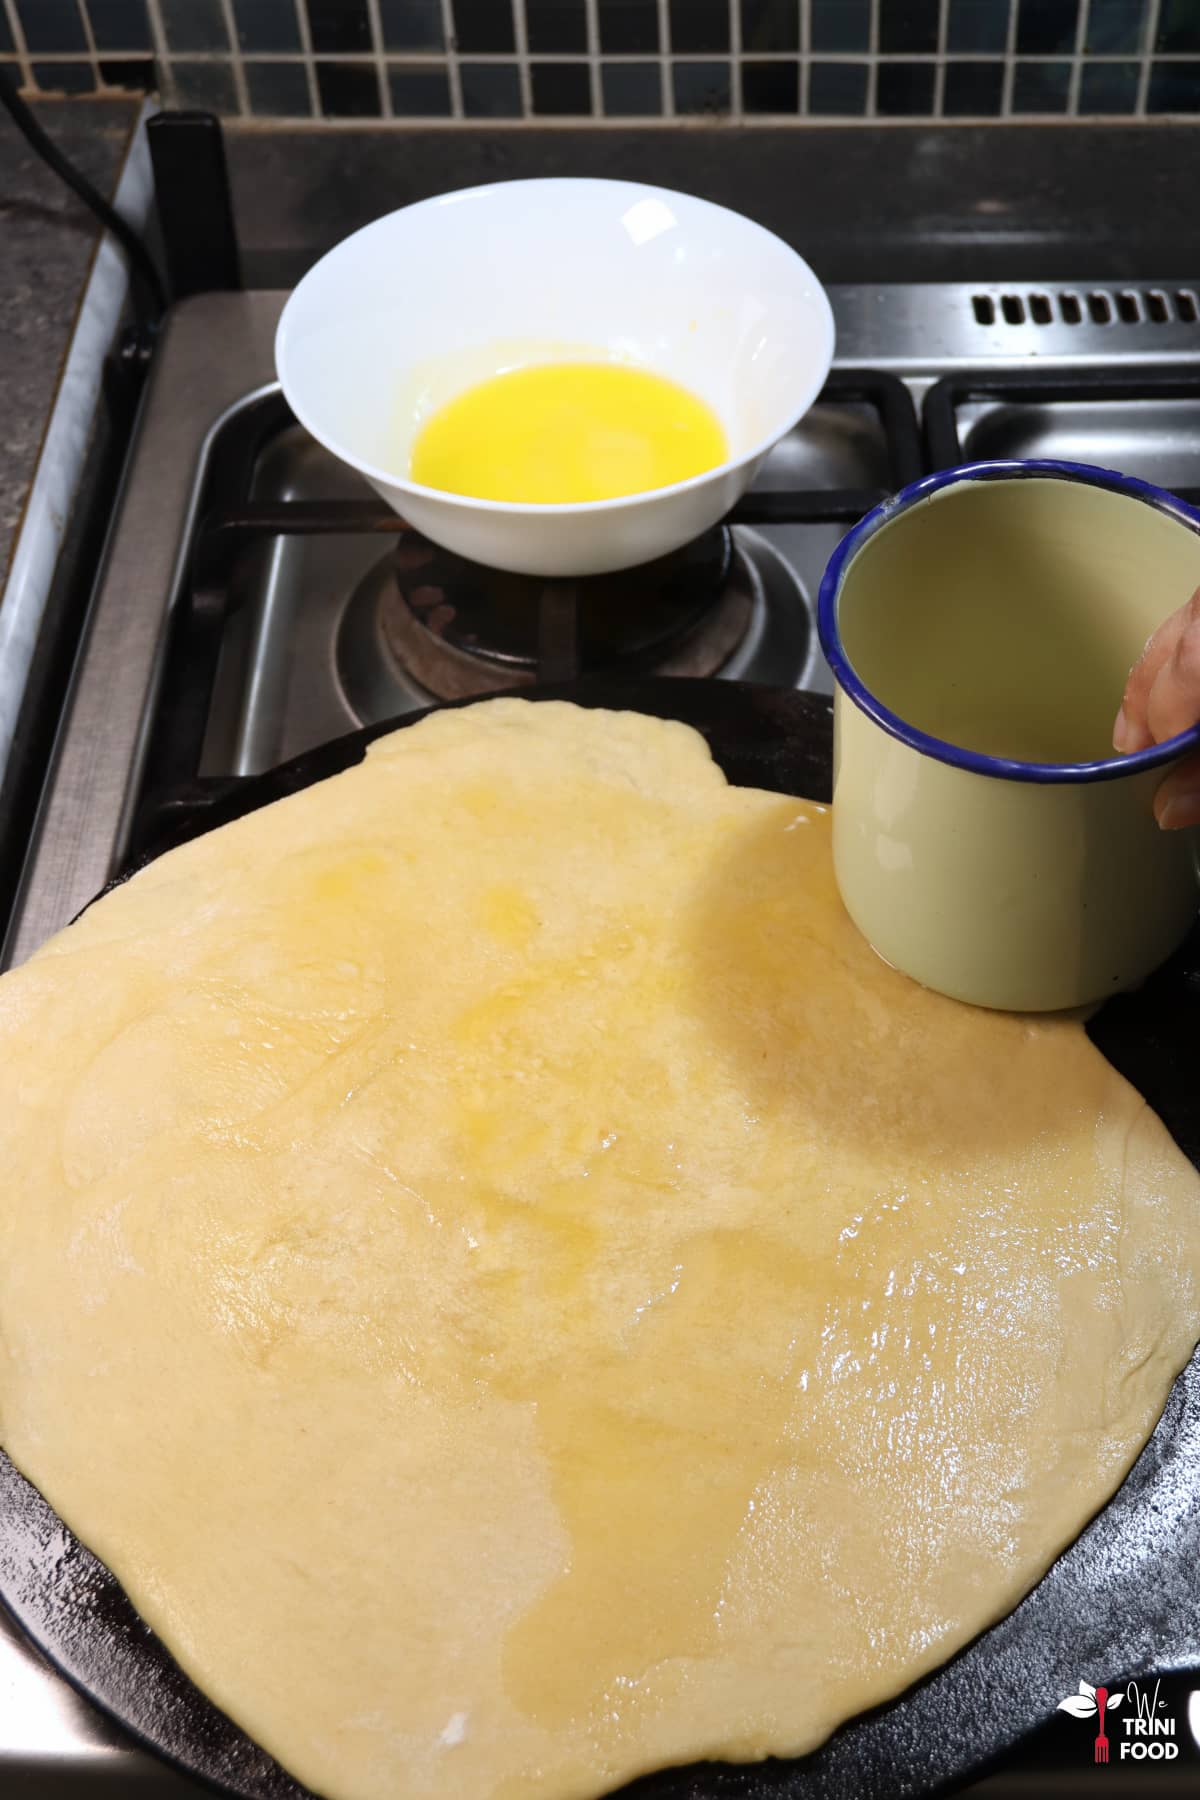 add oil or butter to buss up shut roti while it is cooking on a tawa with a bowl of butter on the side and an enamel cup being used to spread the butter